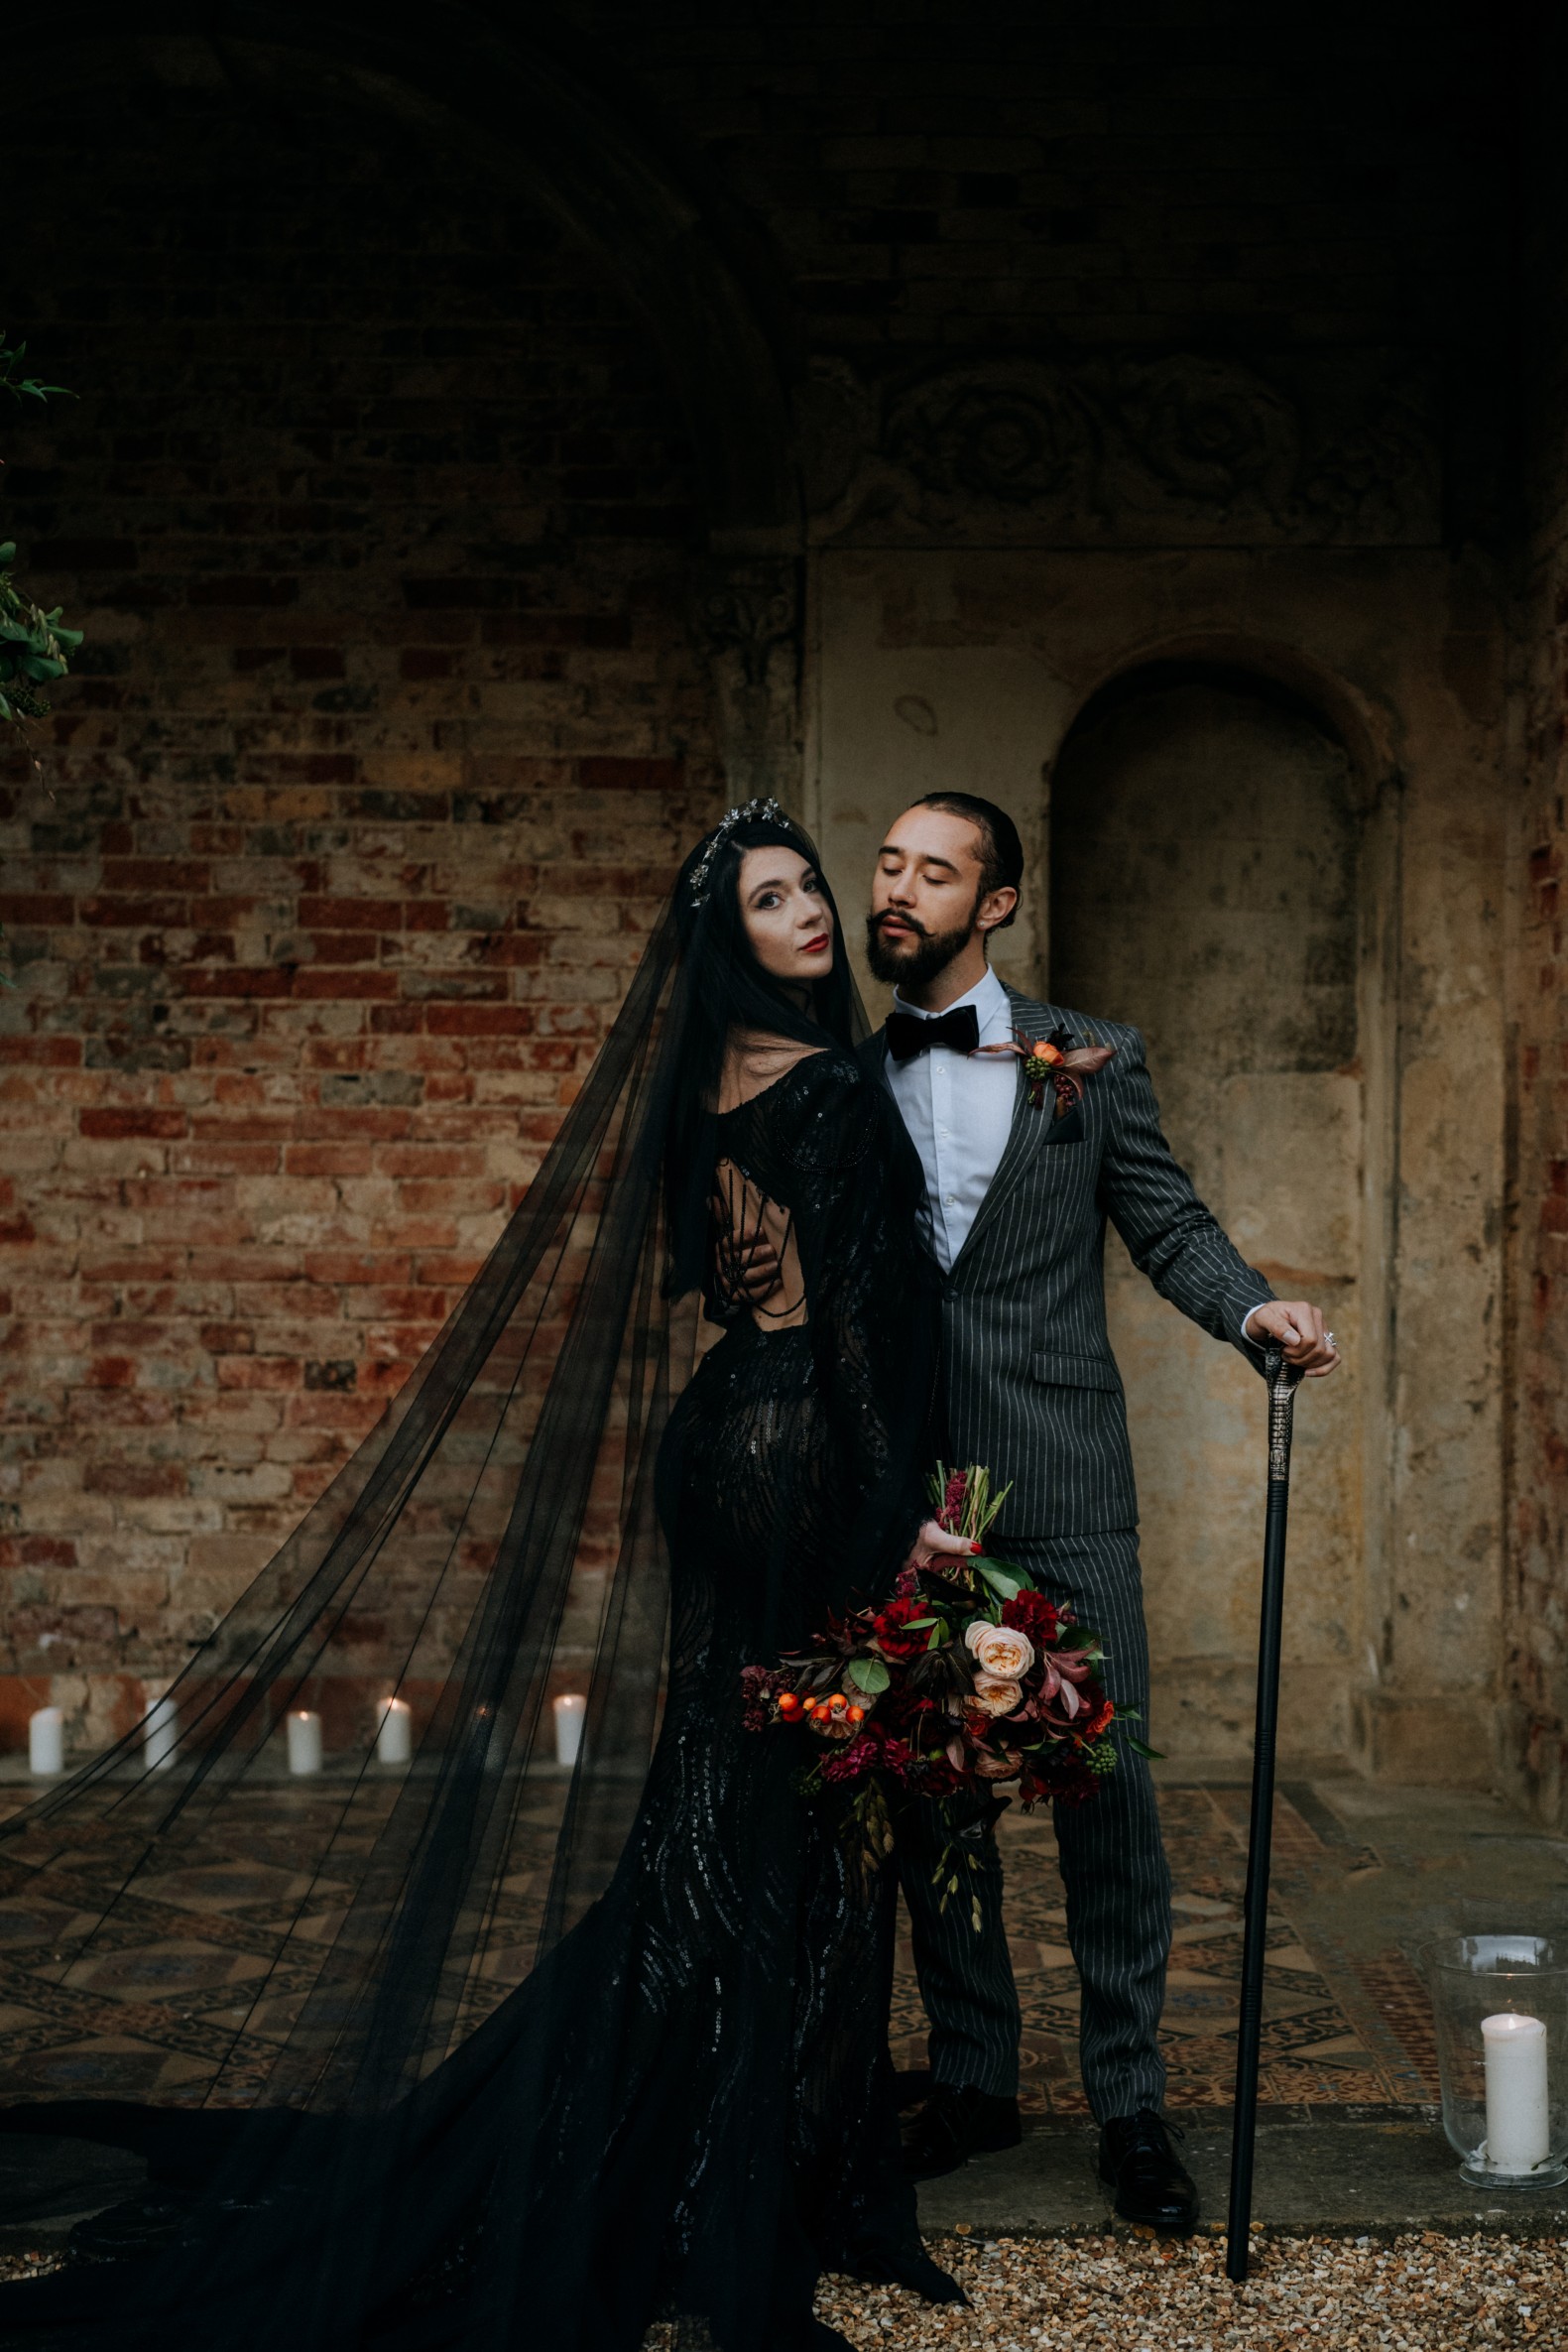 An Addams Family Wedding - When Gomez Married Morticia ⋆ Unconventional  Wedding